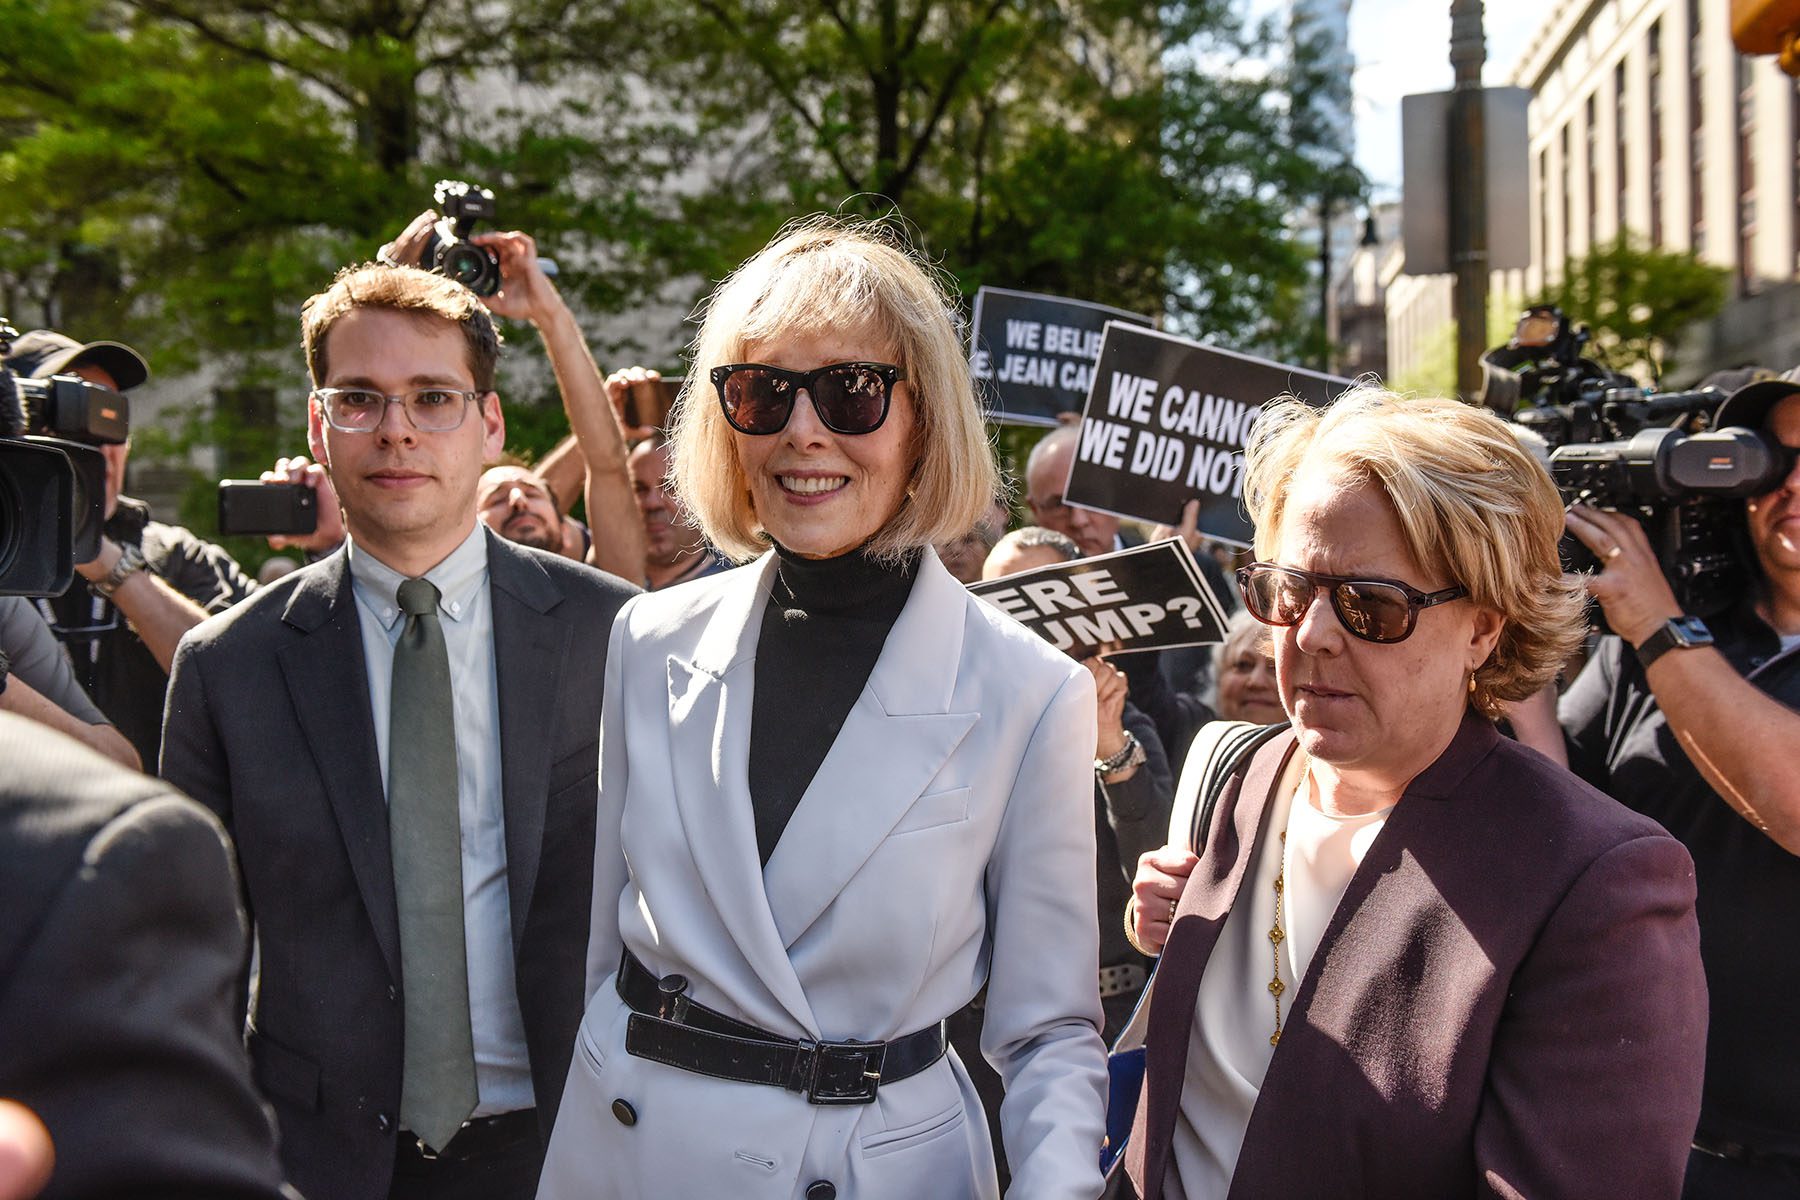 E. Jean Carroll leaves following her trial at Manhattan Federal Court as supporters hold signs and cheer around the courthouse.